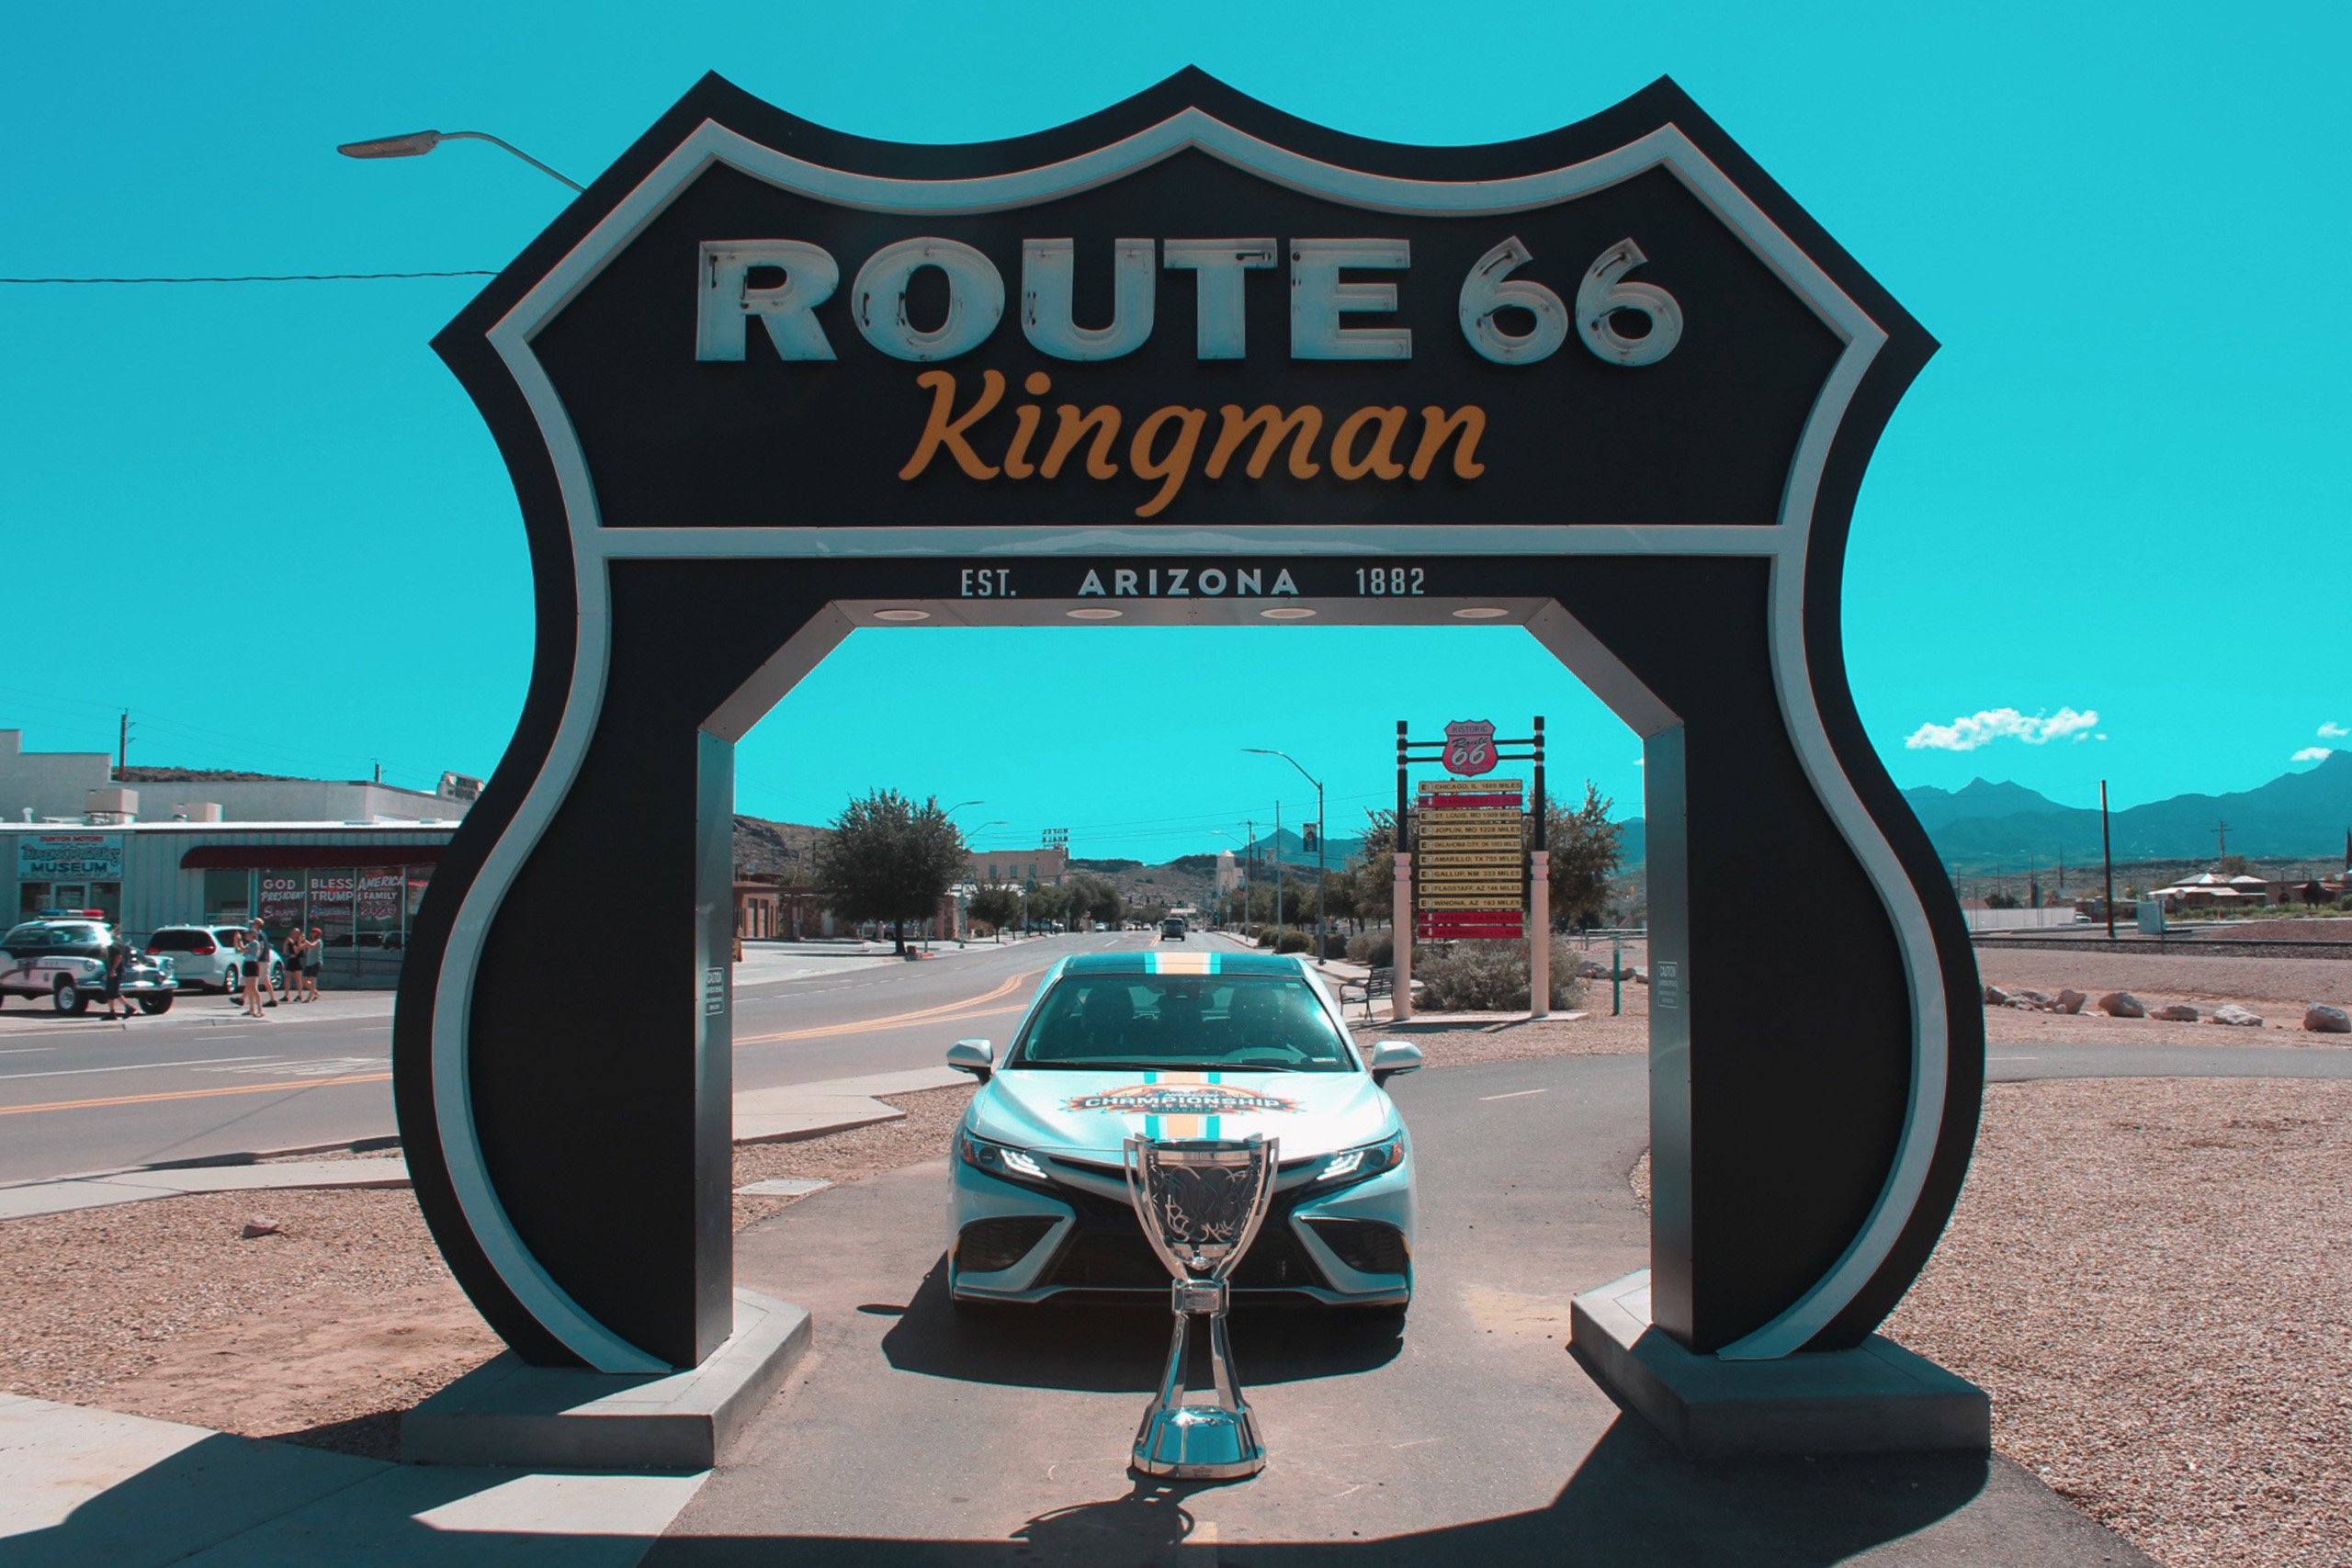 Bill France Cup & the Toyota Camry Phoenix Raceway Pace Car in front of the Route 66 Kingman sign